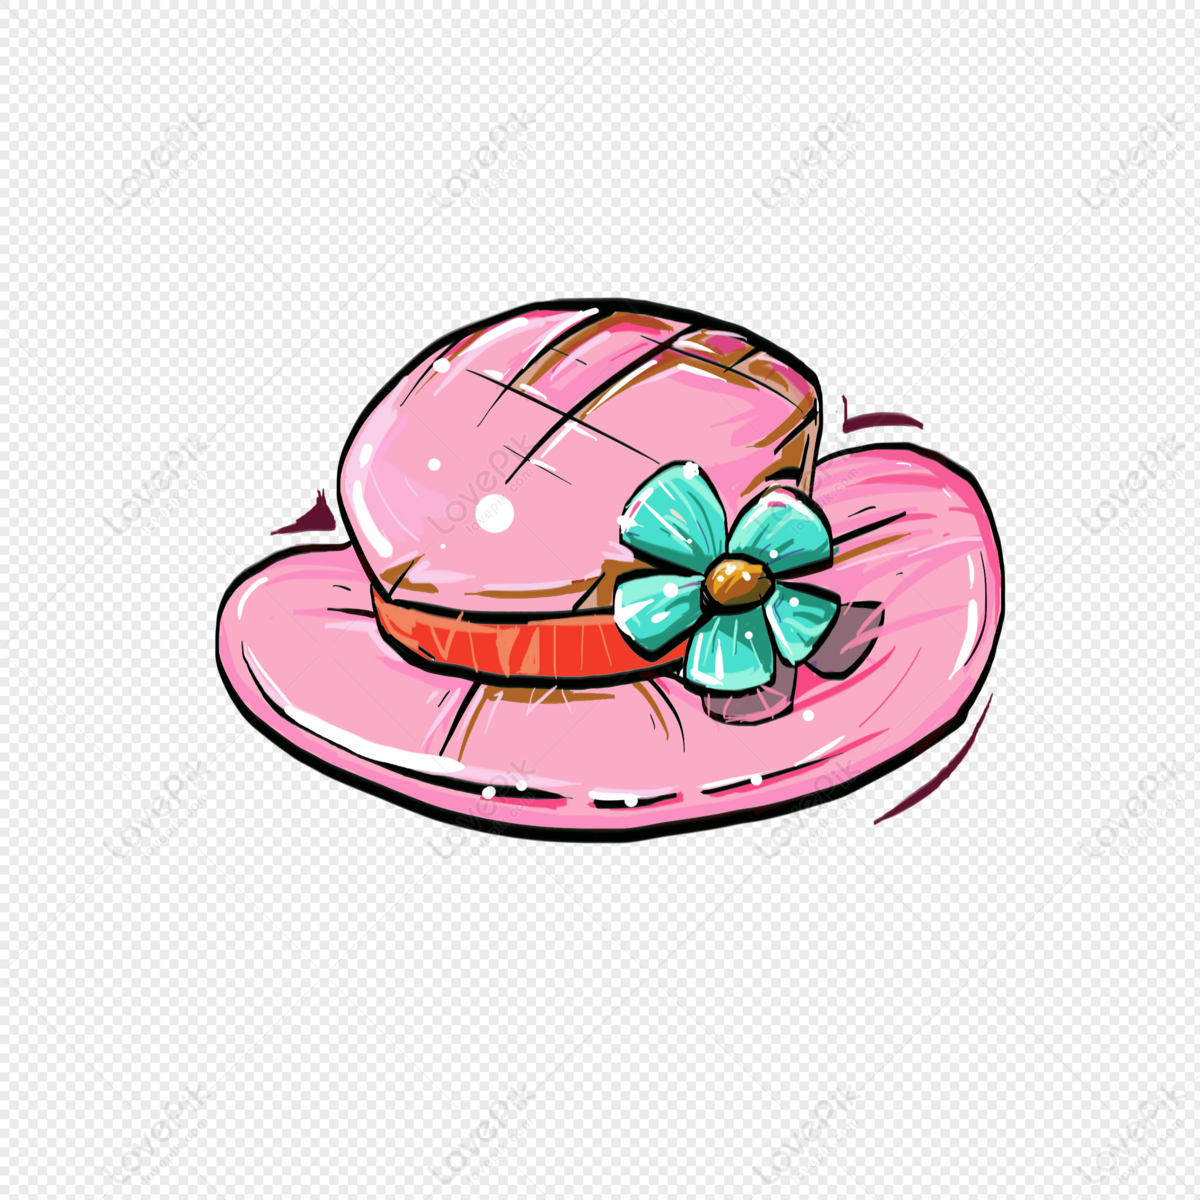 Sunhat PNG Transparent Image And Clipart Image For Free Download ...